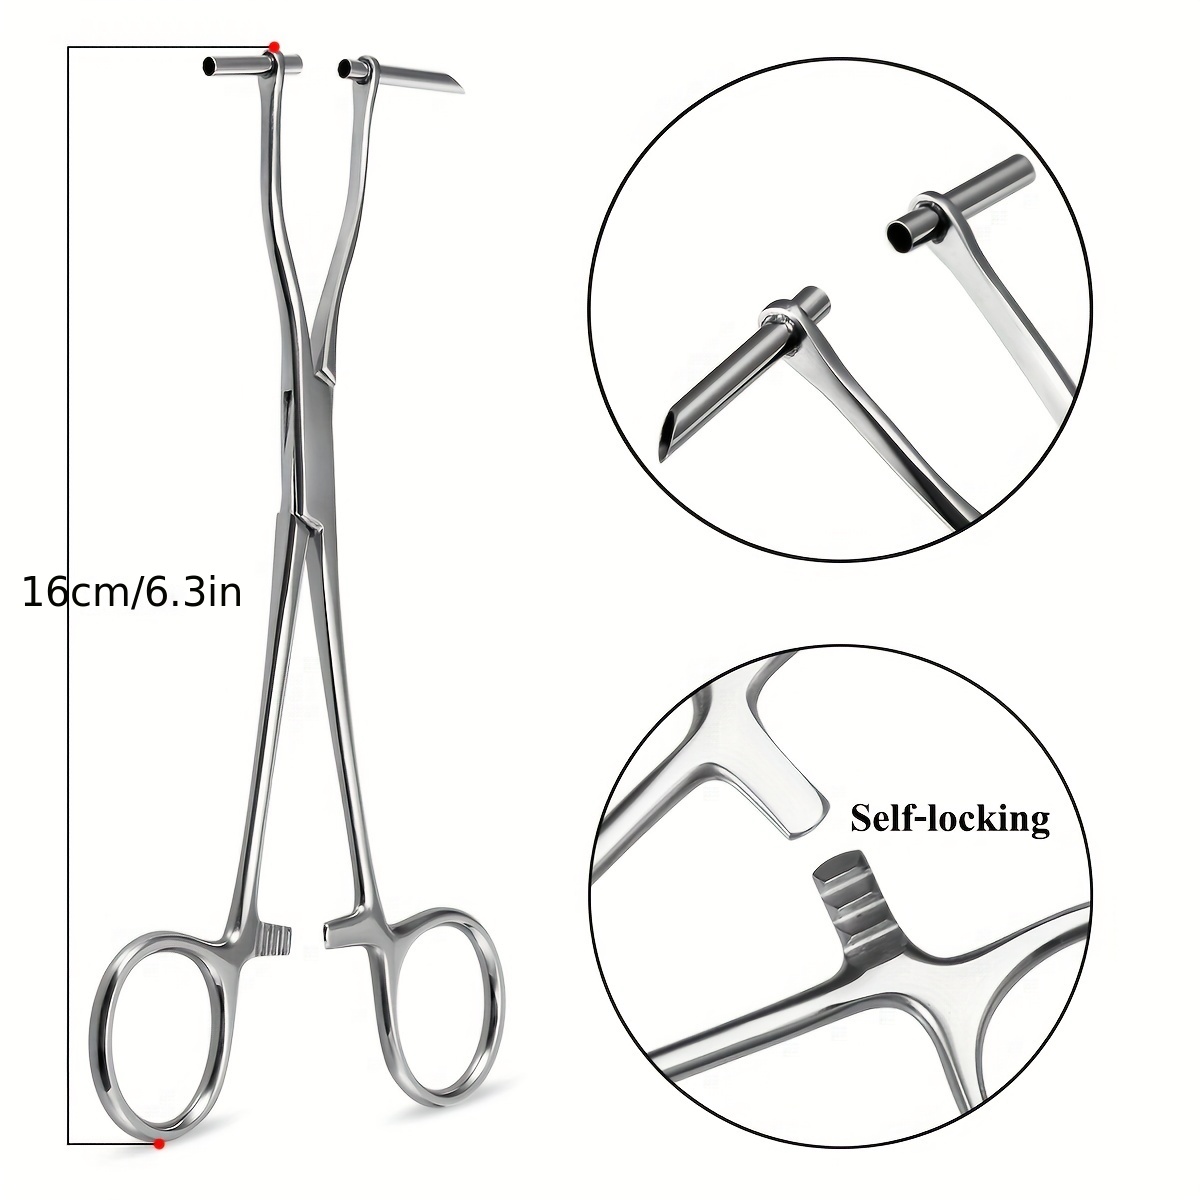 Surgical Steel Body Piercing Tool Kit Professional Needle Clamp Pliers  Gloves Taper Pull Pin Lip Nose Navel Piercing Set Jewelry